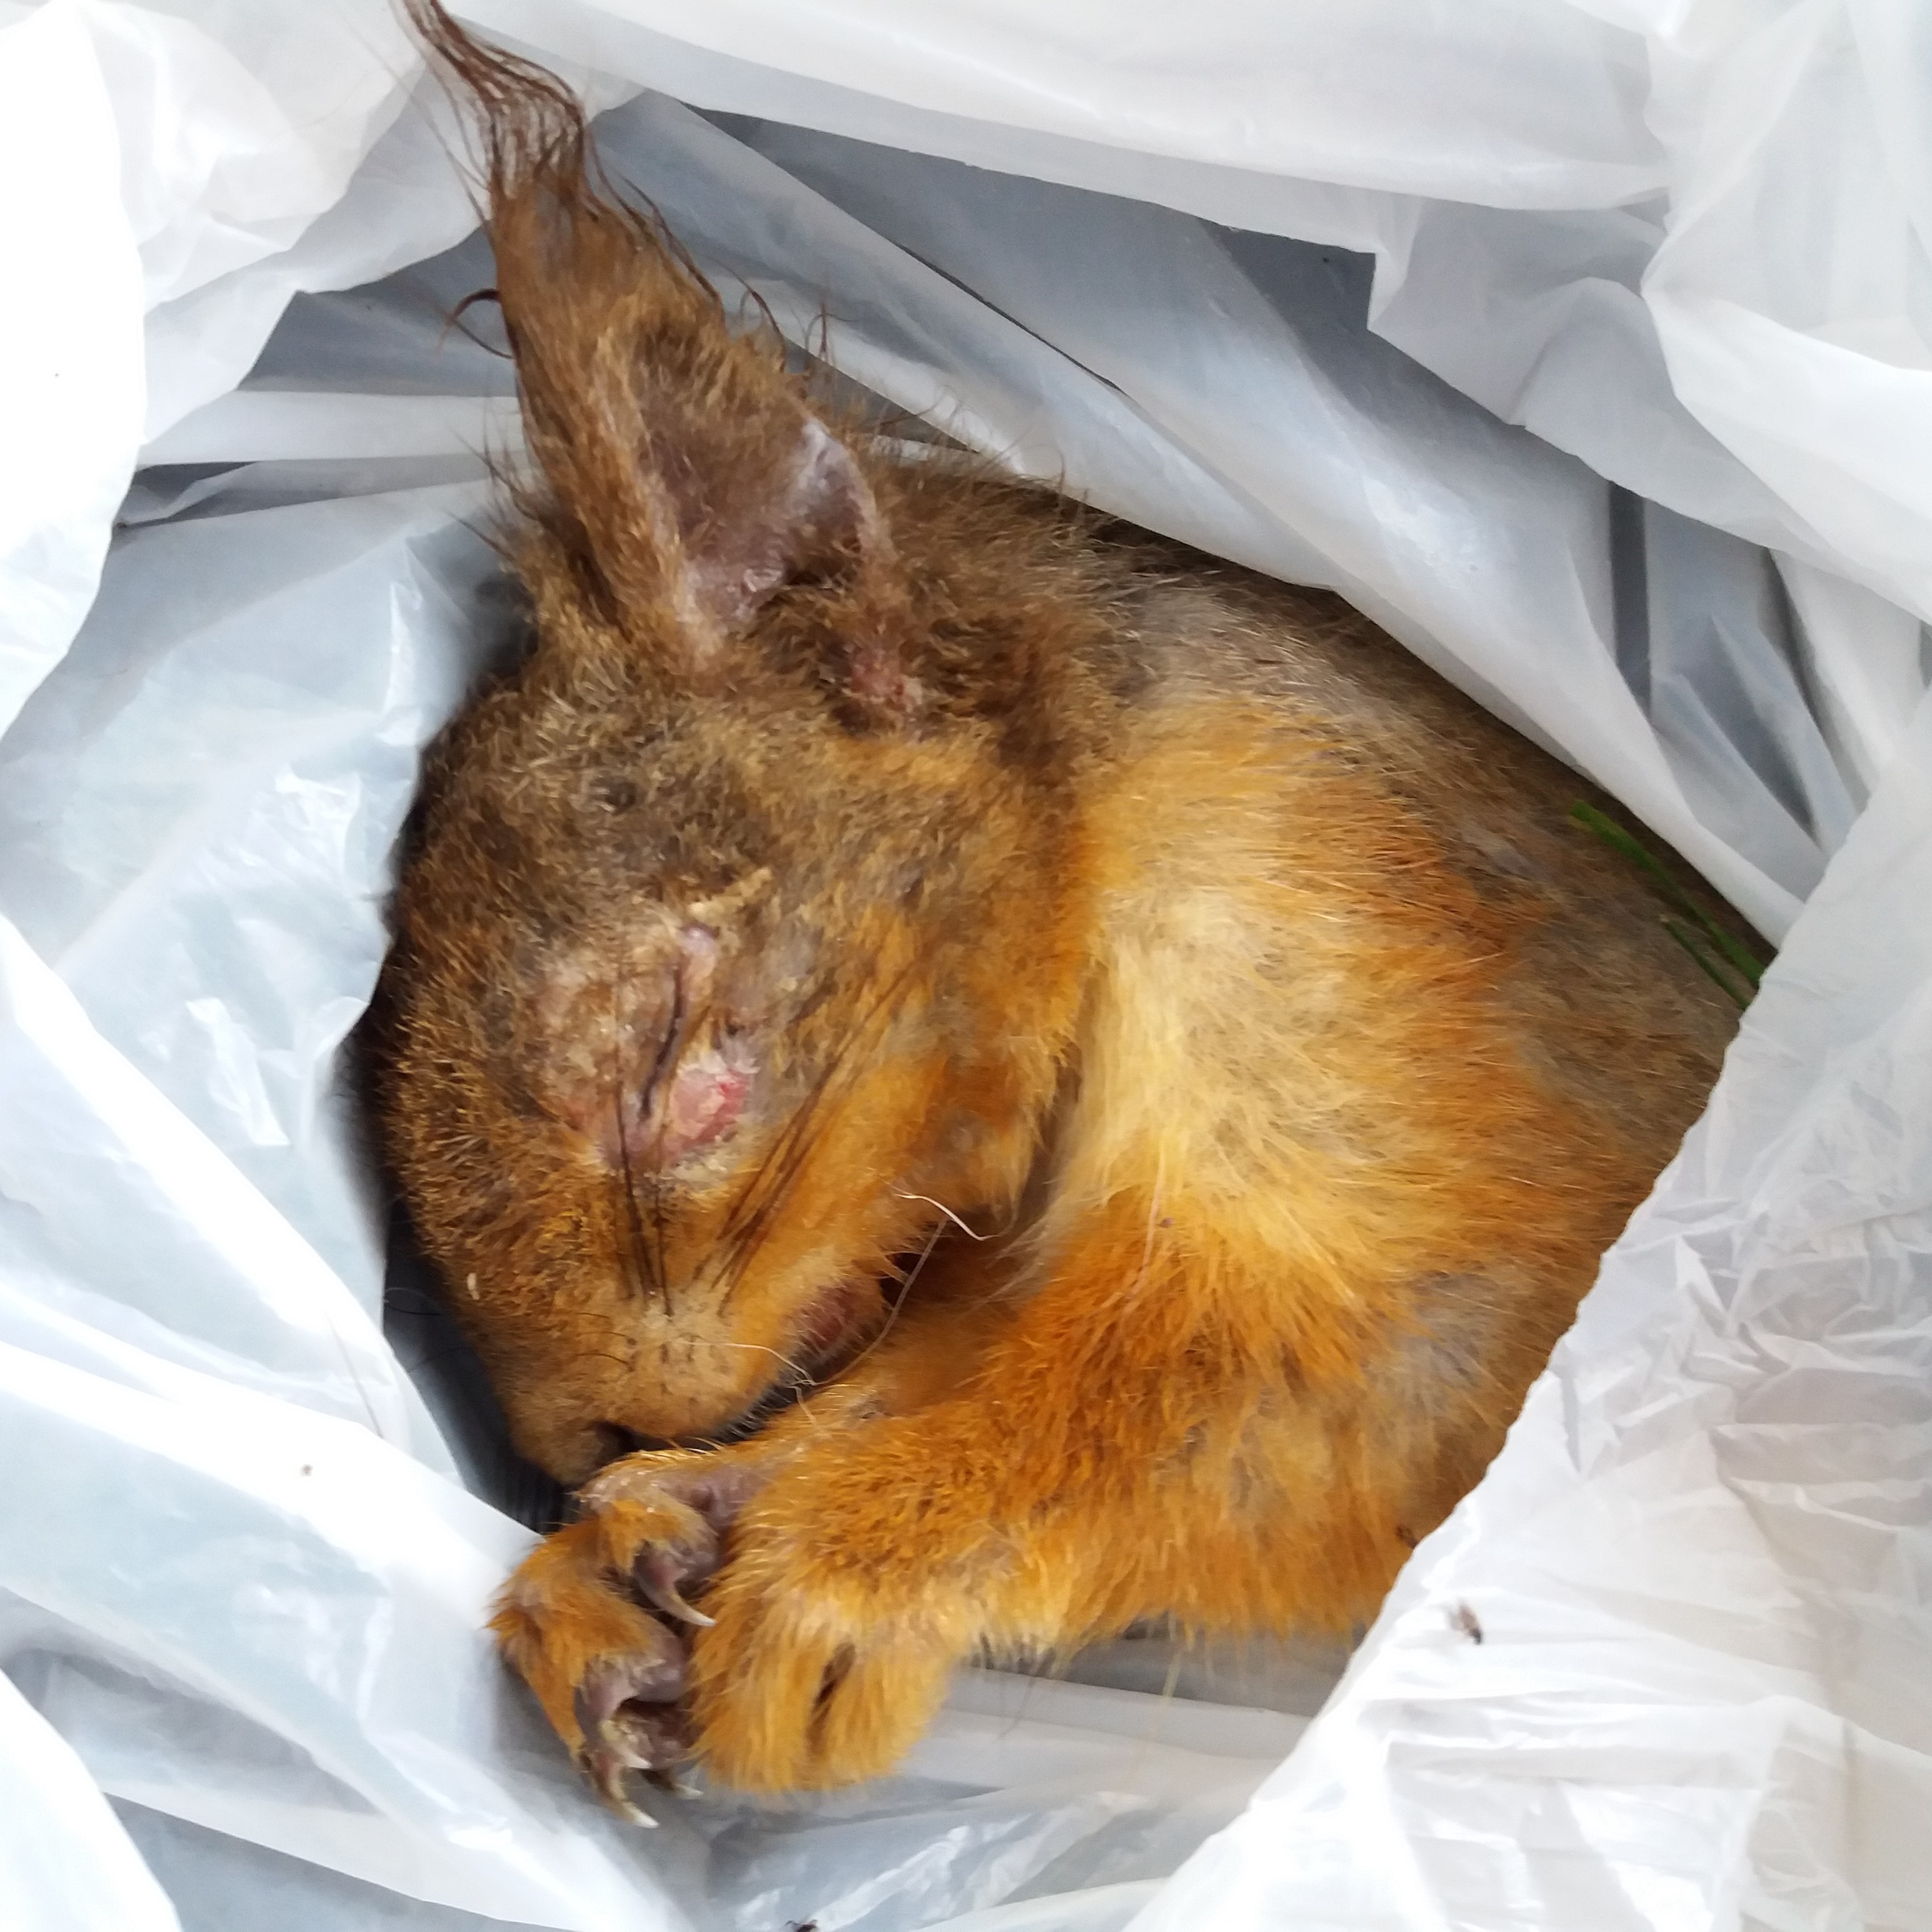 News: First death of red squirrel from squirrelpox virus confirmed north of Scotland’s Central Belt